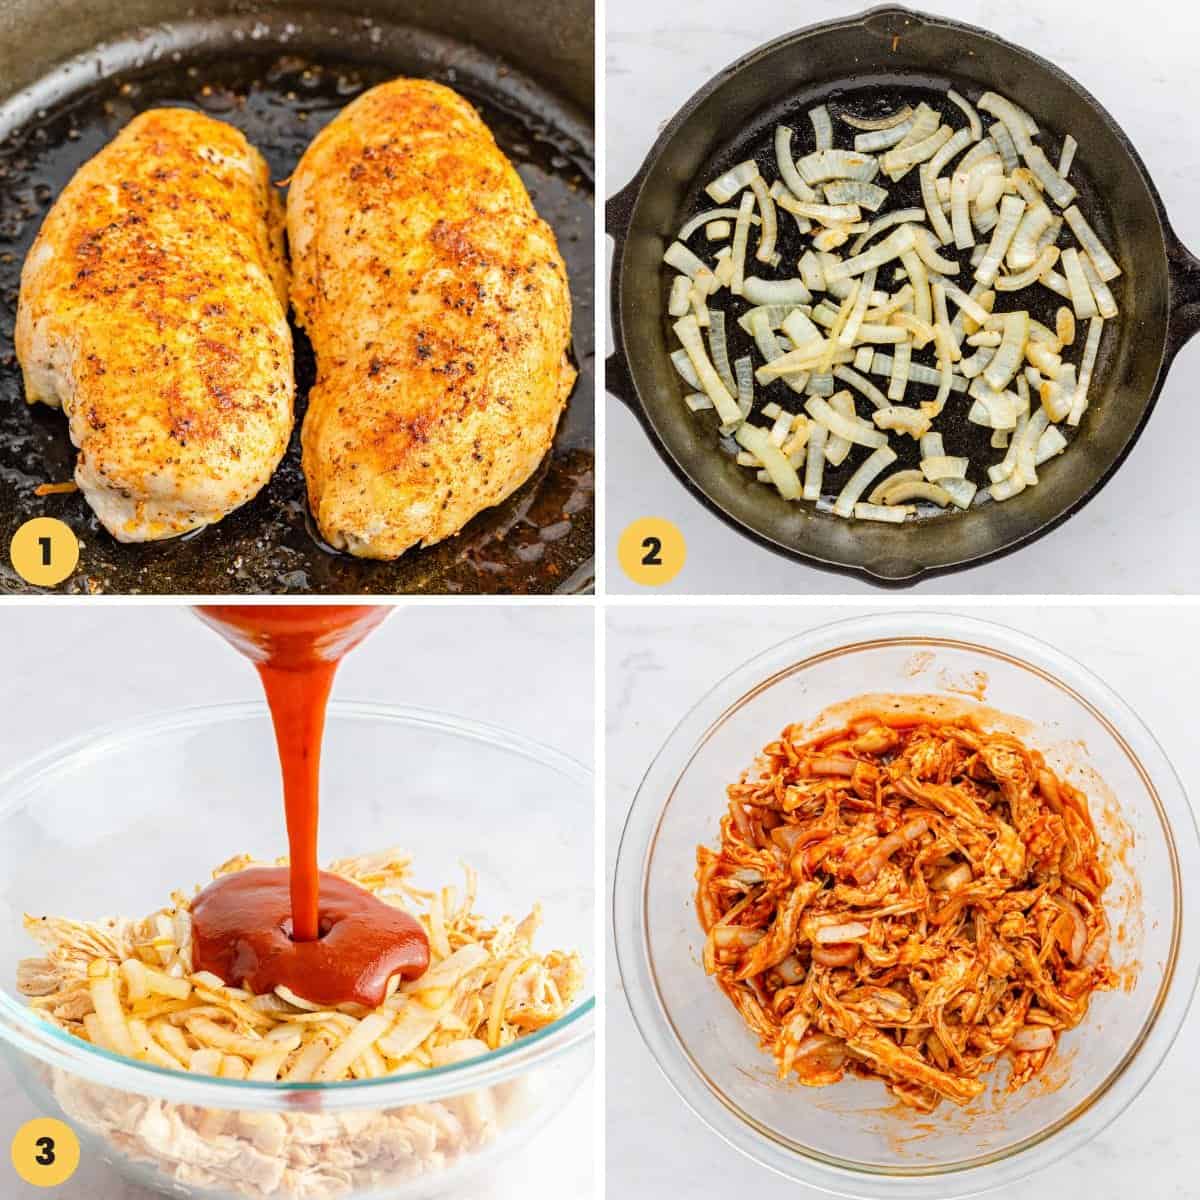 a collage of images showing how to complete steps one and two of making barbecue chicken sliders.